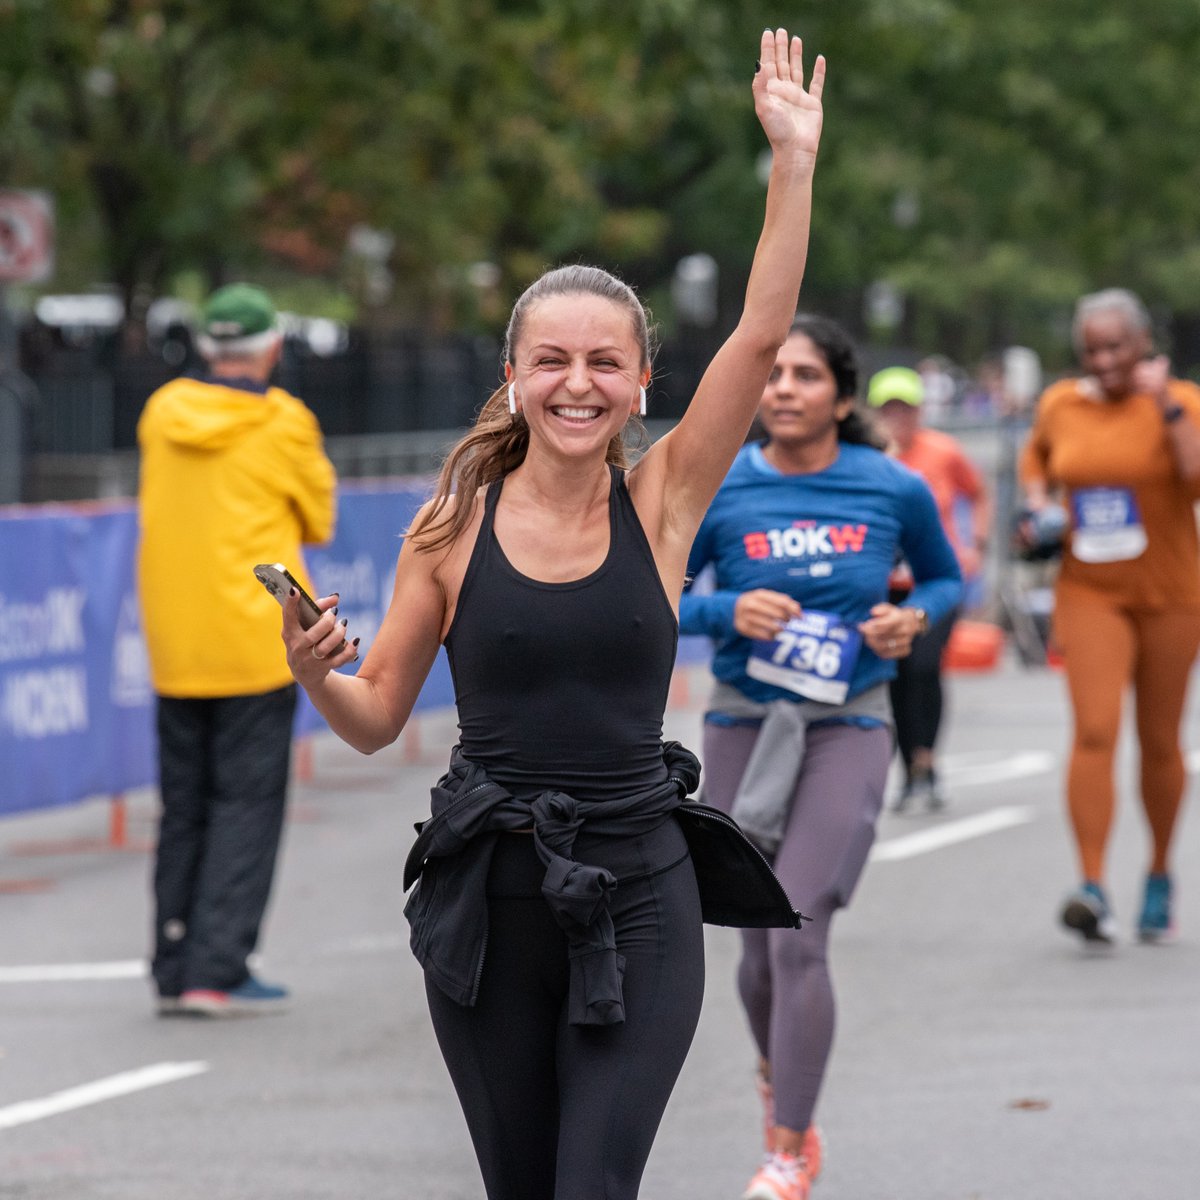 Raise your hand if you’ve registered for this year’s Boston 10K for Women! Not yet? Click the link and register today: runsignup.com/Race/MA/Boston…